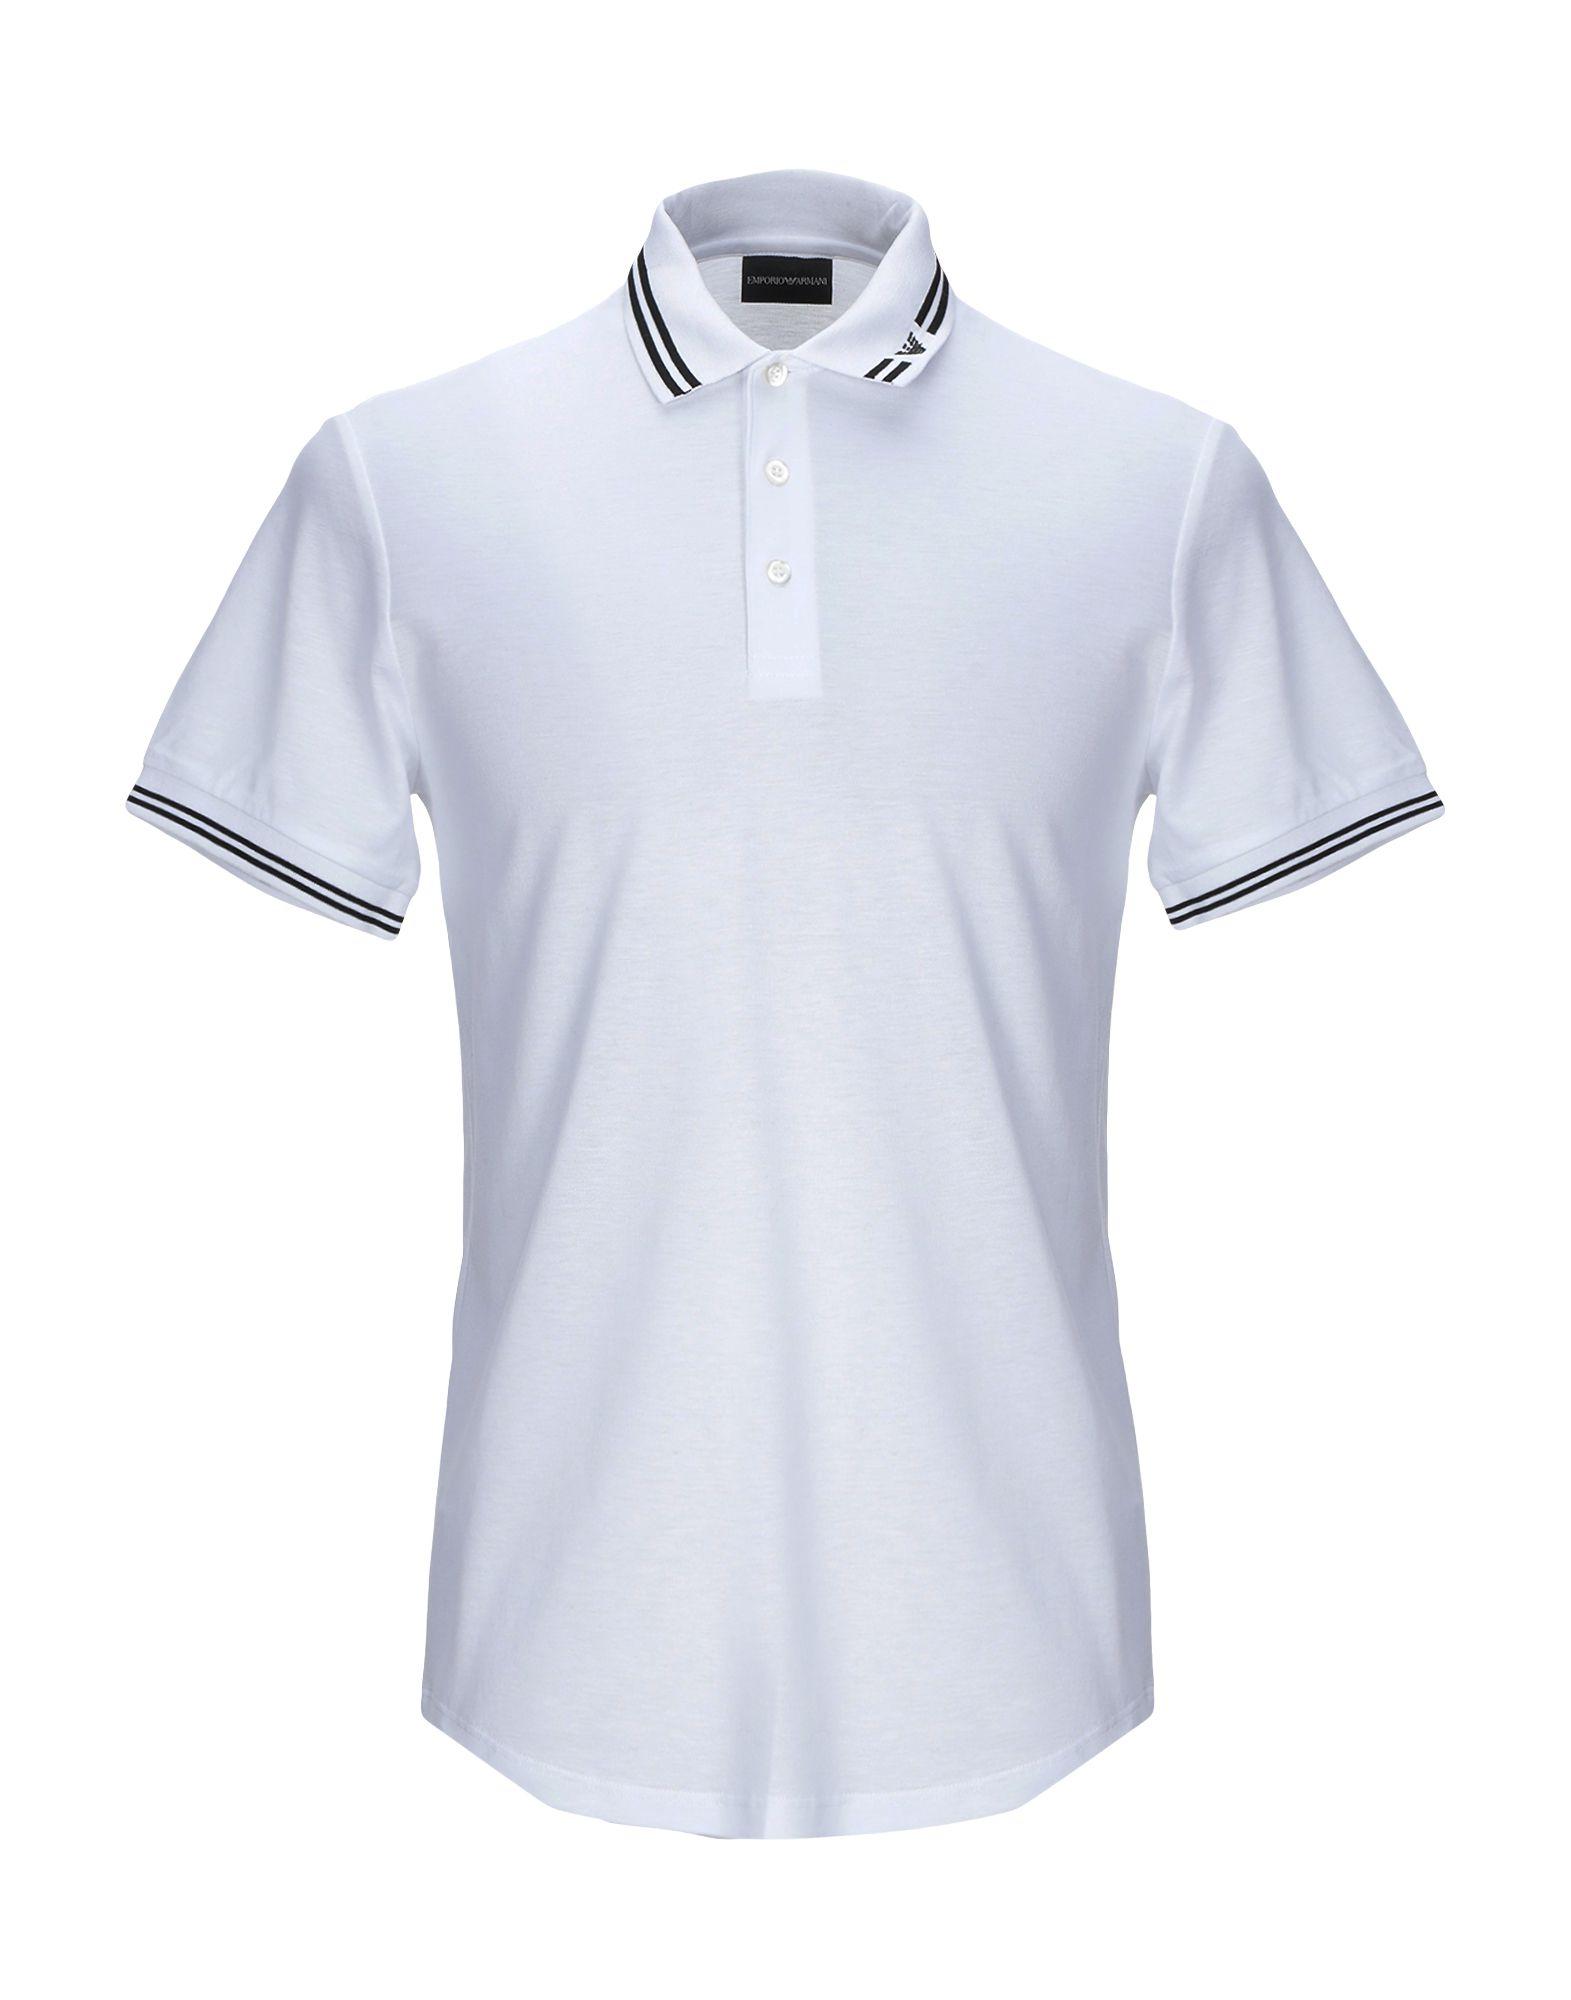 Emporio Armani Synthetic Polo Shirt in White for Men - Lyst